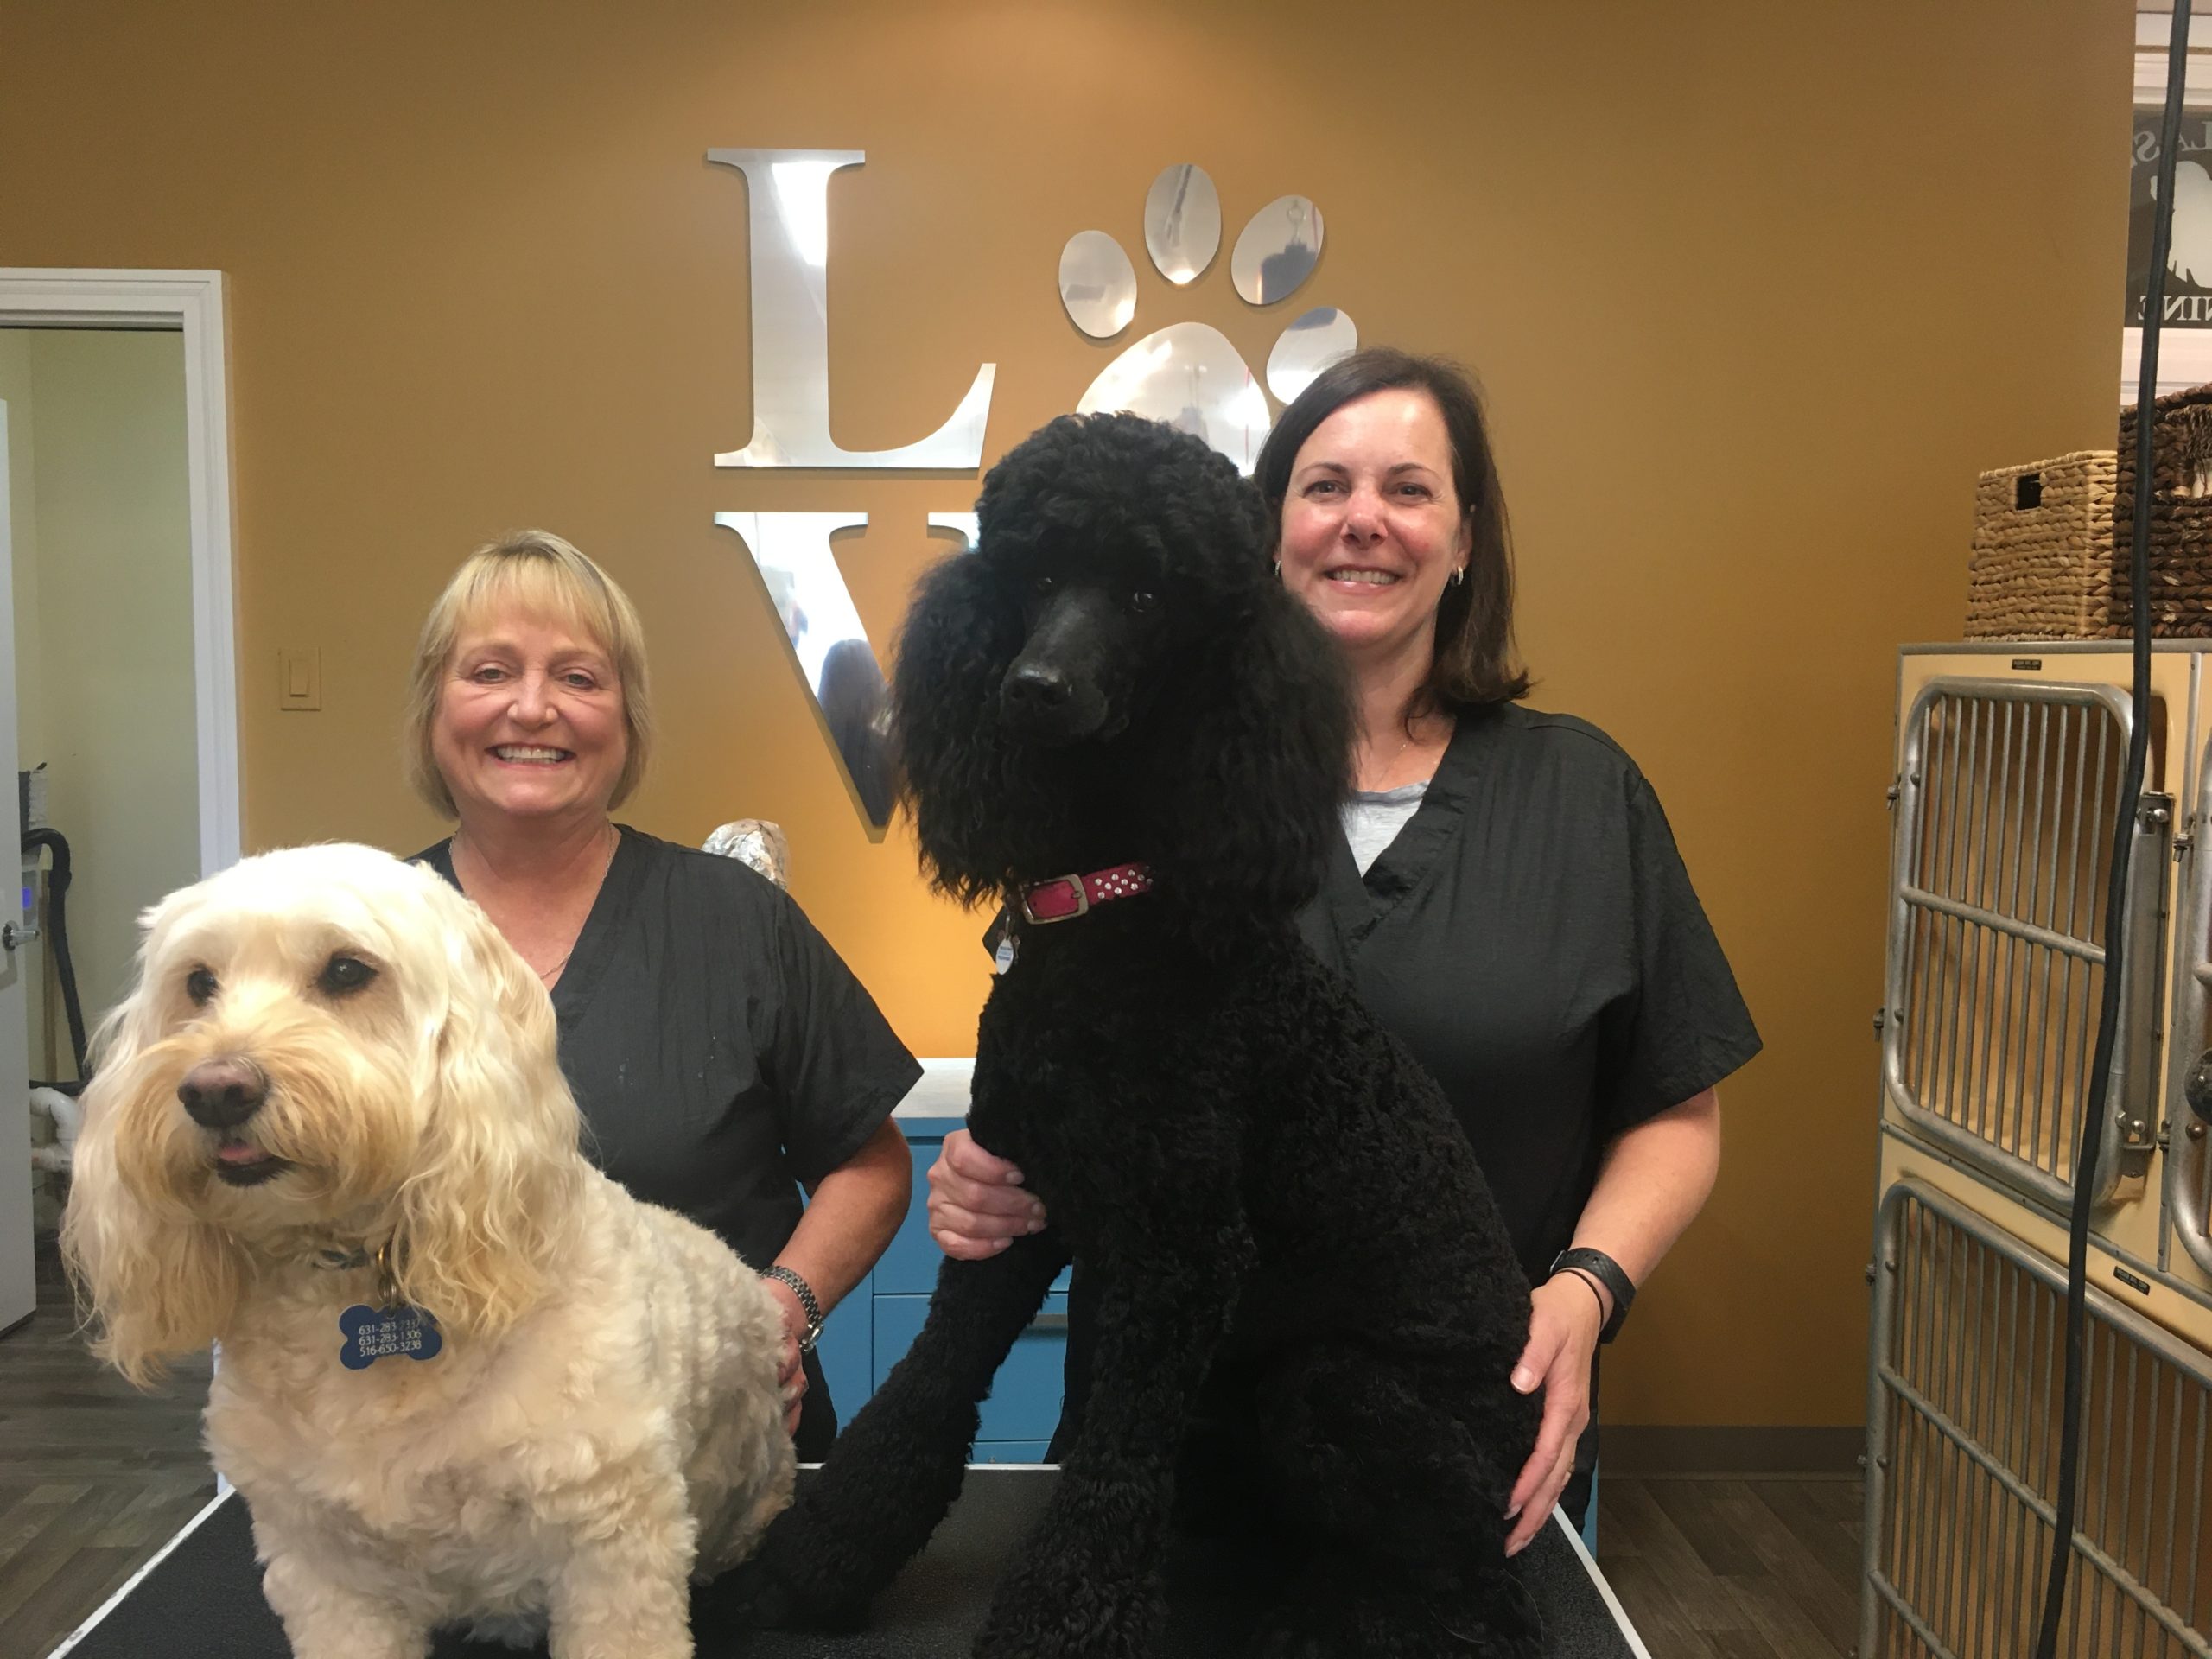 Kelly Scammell Humphreys (on the left), with her dog Mr. Parker, and new owner Jennifer Bockhaus (on the right), with her dog Beverly, at the Classy Canine in Southampton. 